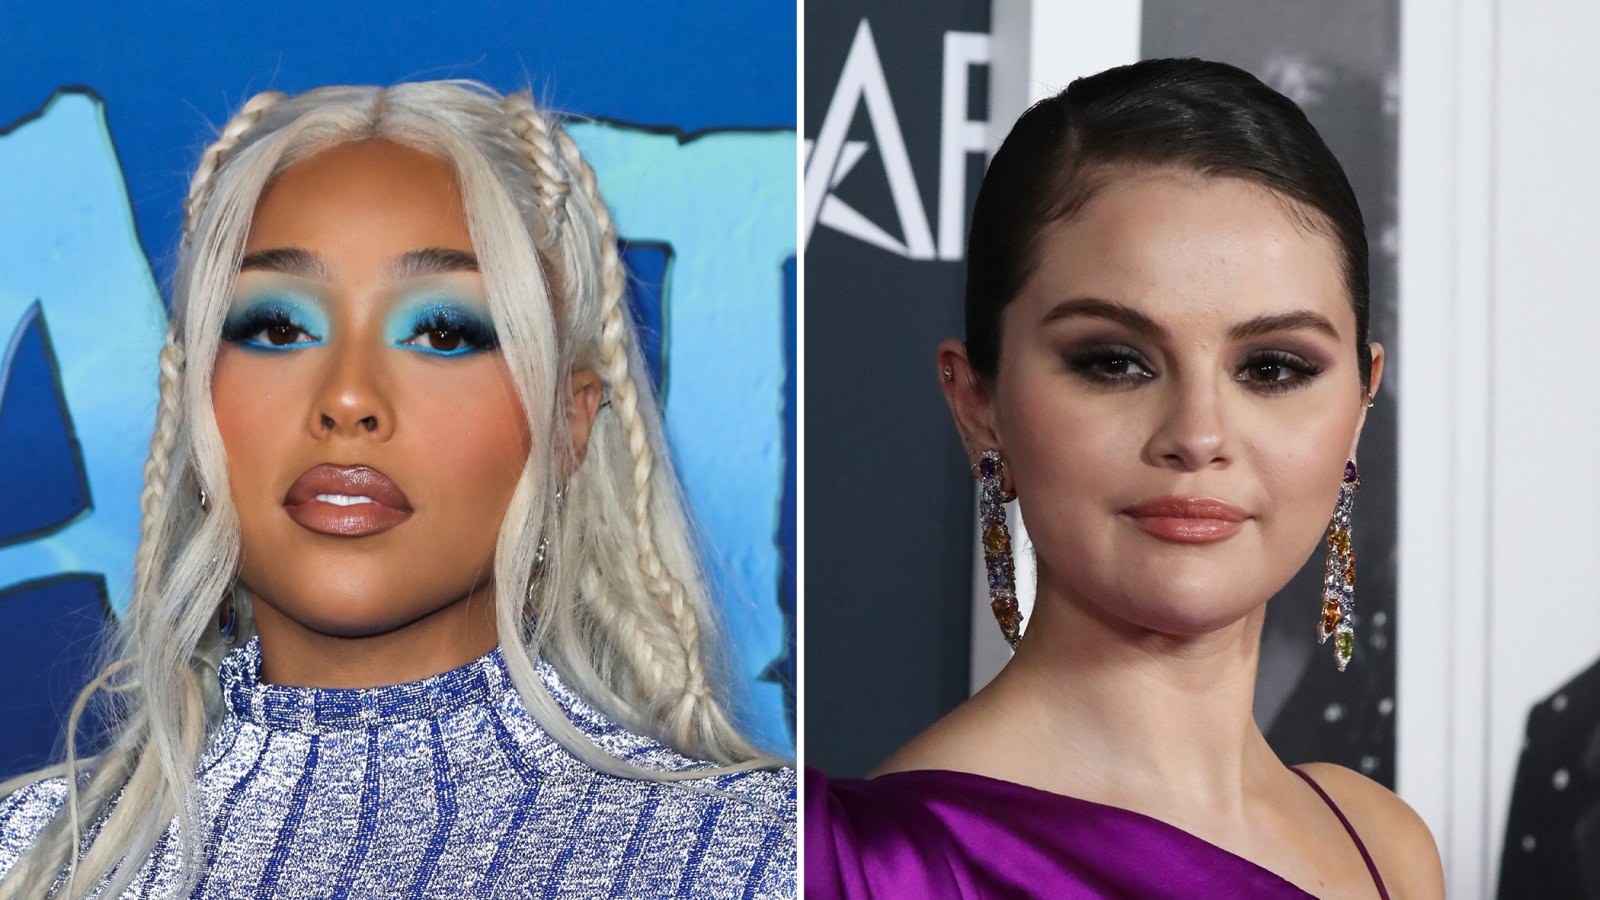 Jordyn Woods Seemingly Shows Support for Selena Gomez Amid Kylie and Hailey Bieber